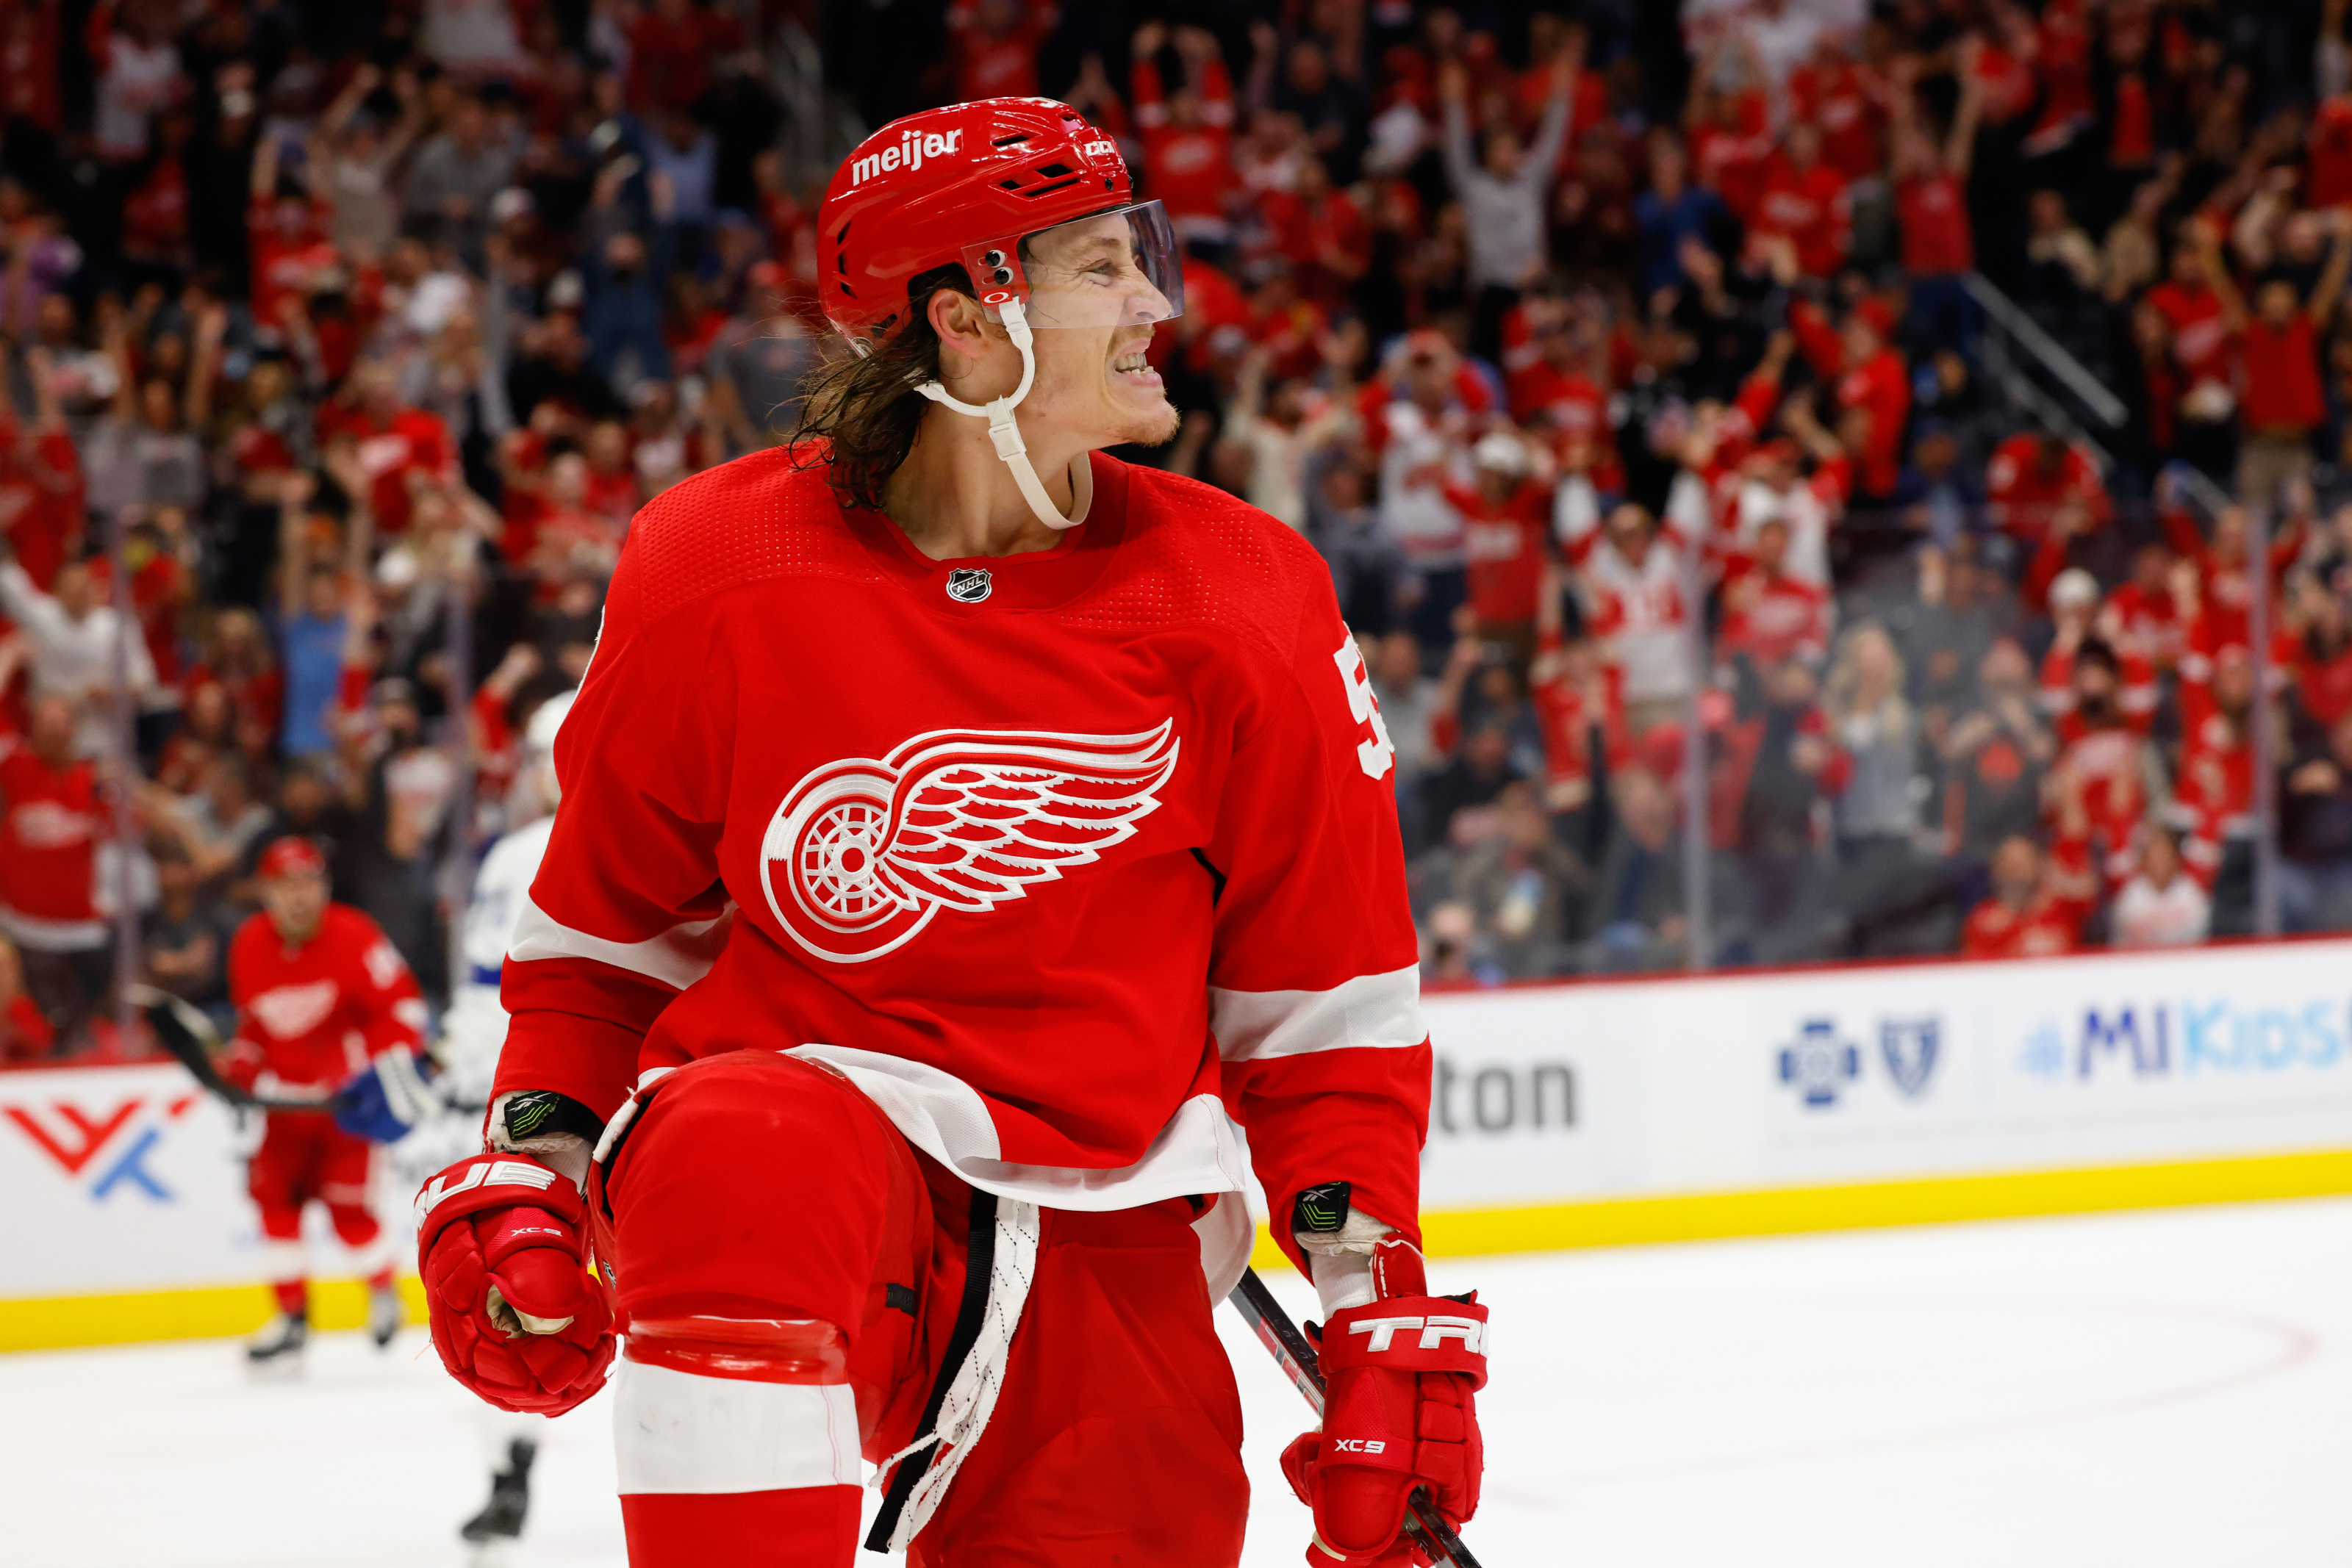 Red Wings' Bertuzzi: 'This Is Where I Want To Be